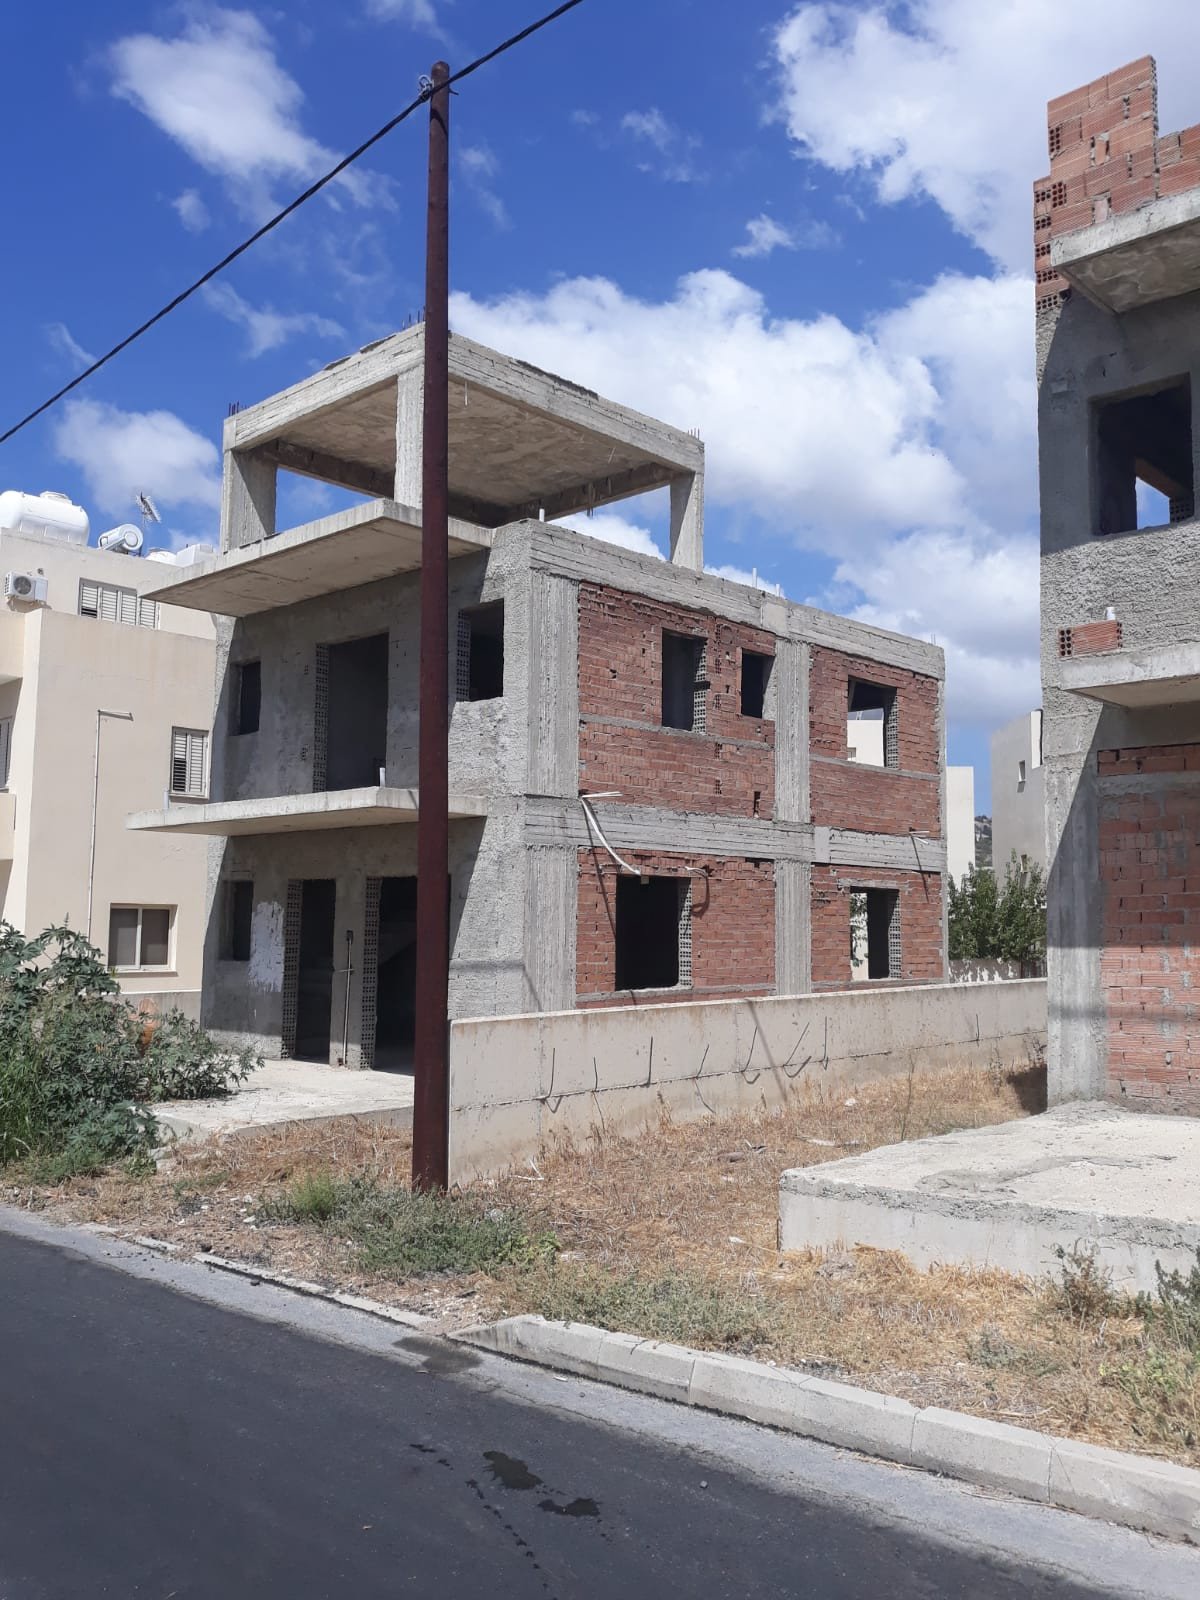 Property for Sale: Investment (Residential) in Agia Marinouda, Paphos  | Key Realtor Cyprus